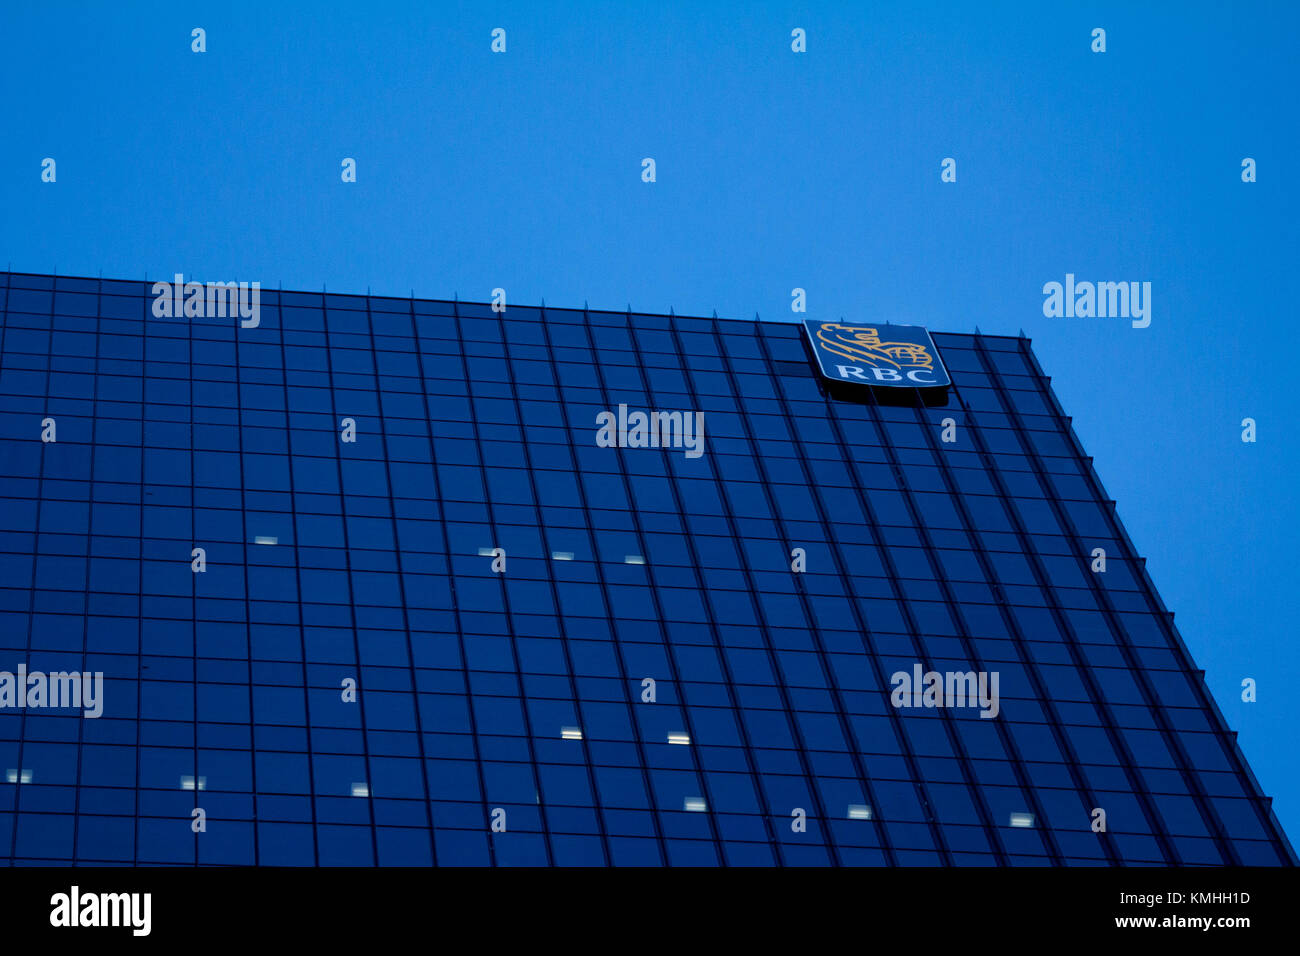 TORONTO, CANADA - DECEMBER 21, 2016: Headquarters of the Royal Bank of Canada (RBC) in Toronto, Ontario, Canada with the illumniated logo of the corpo Stock Photo